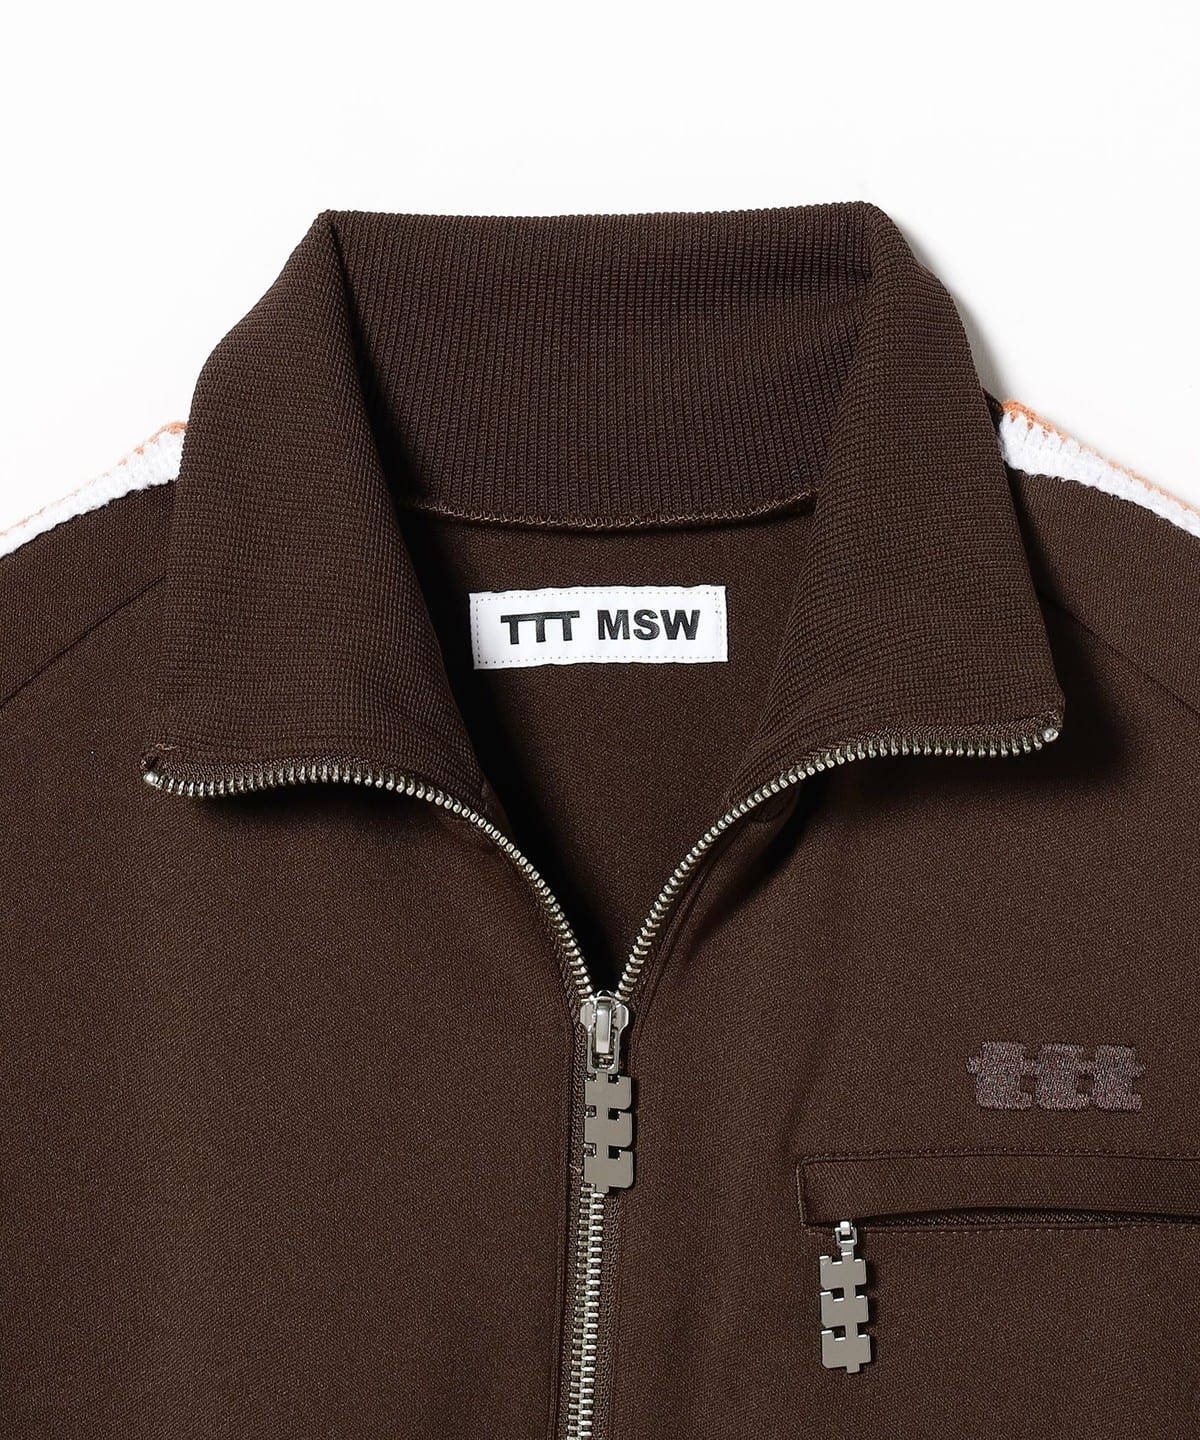 Ray BEAMS（レイ ビームス）○TTTMSW / Track Suit Jacket（ジャケット ...